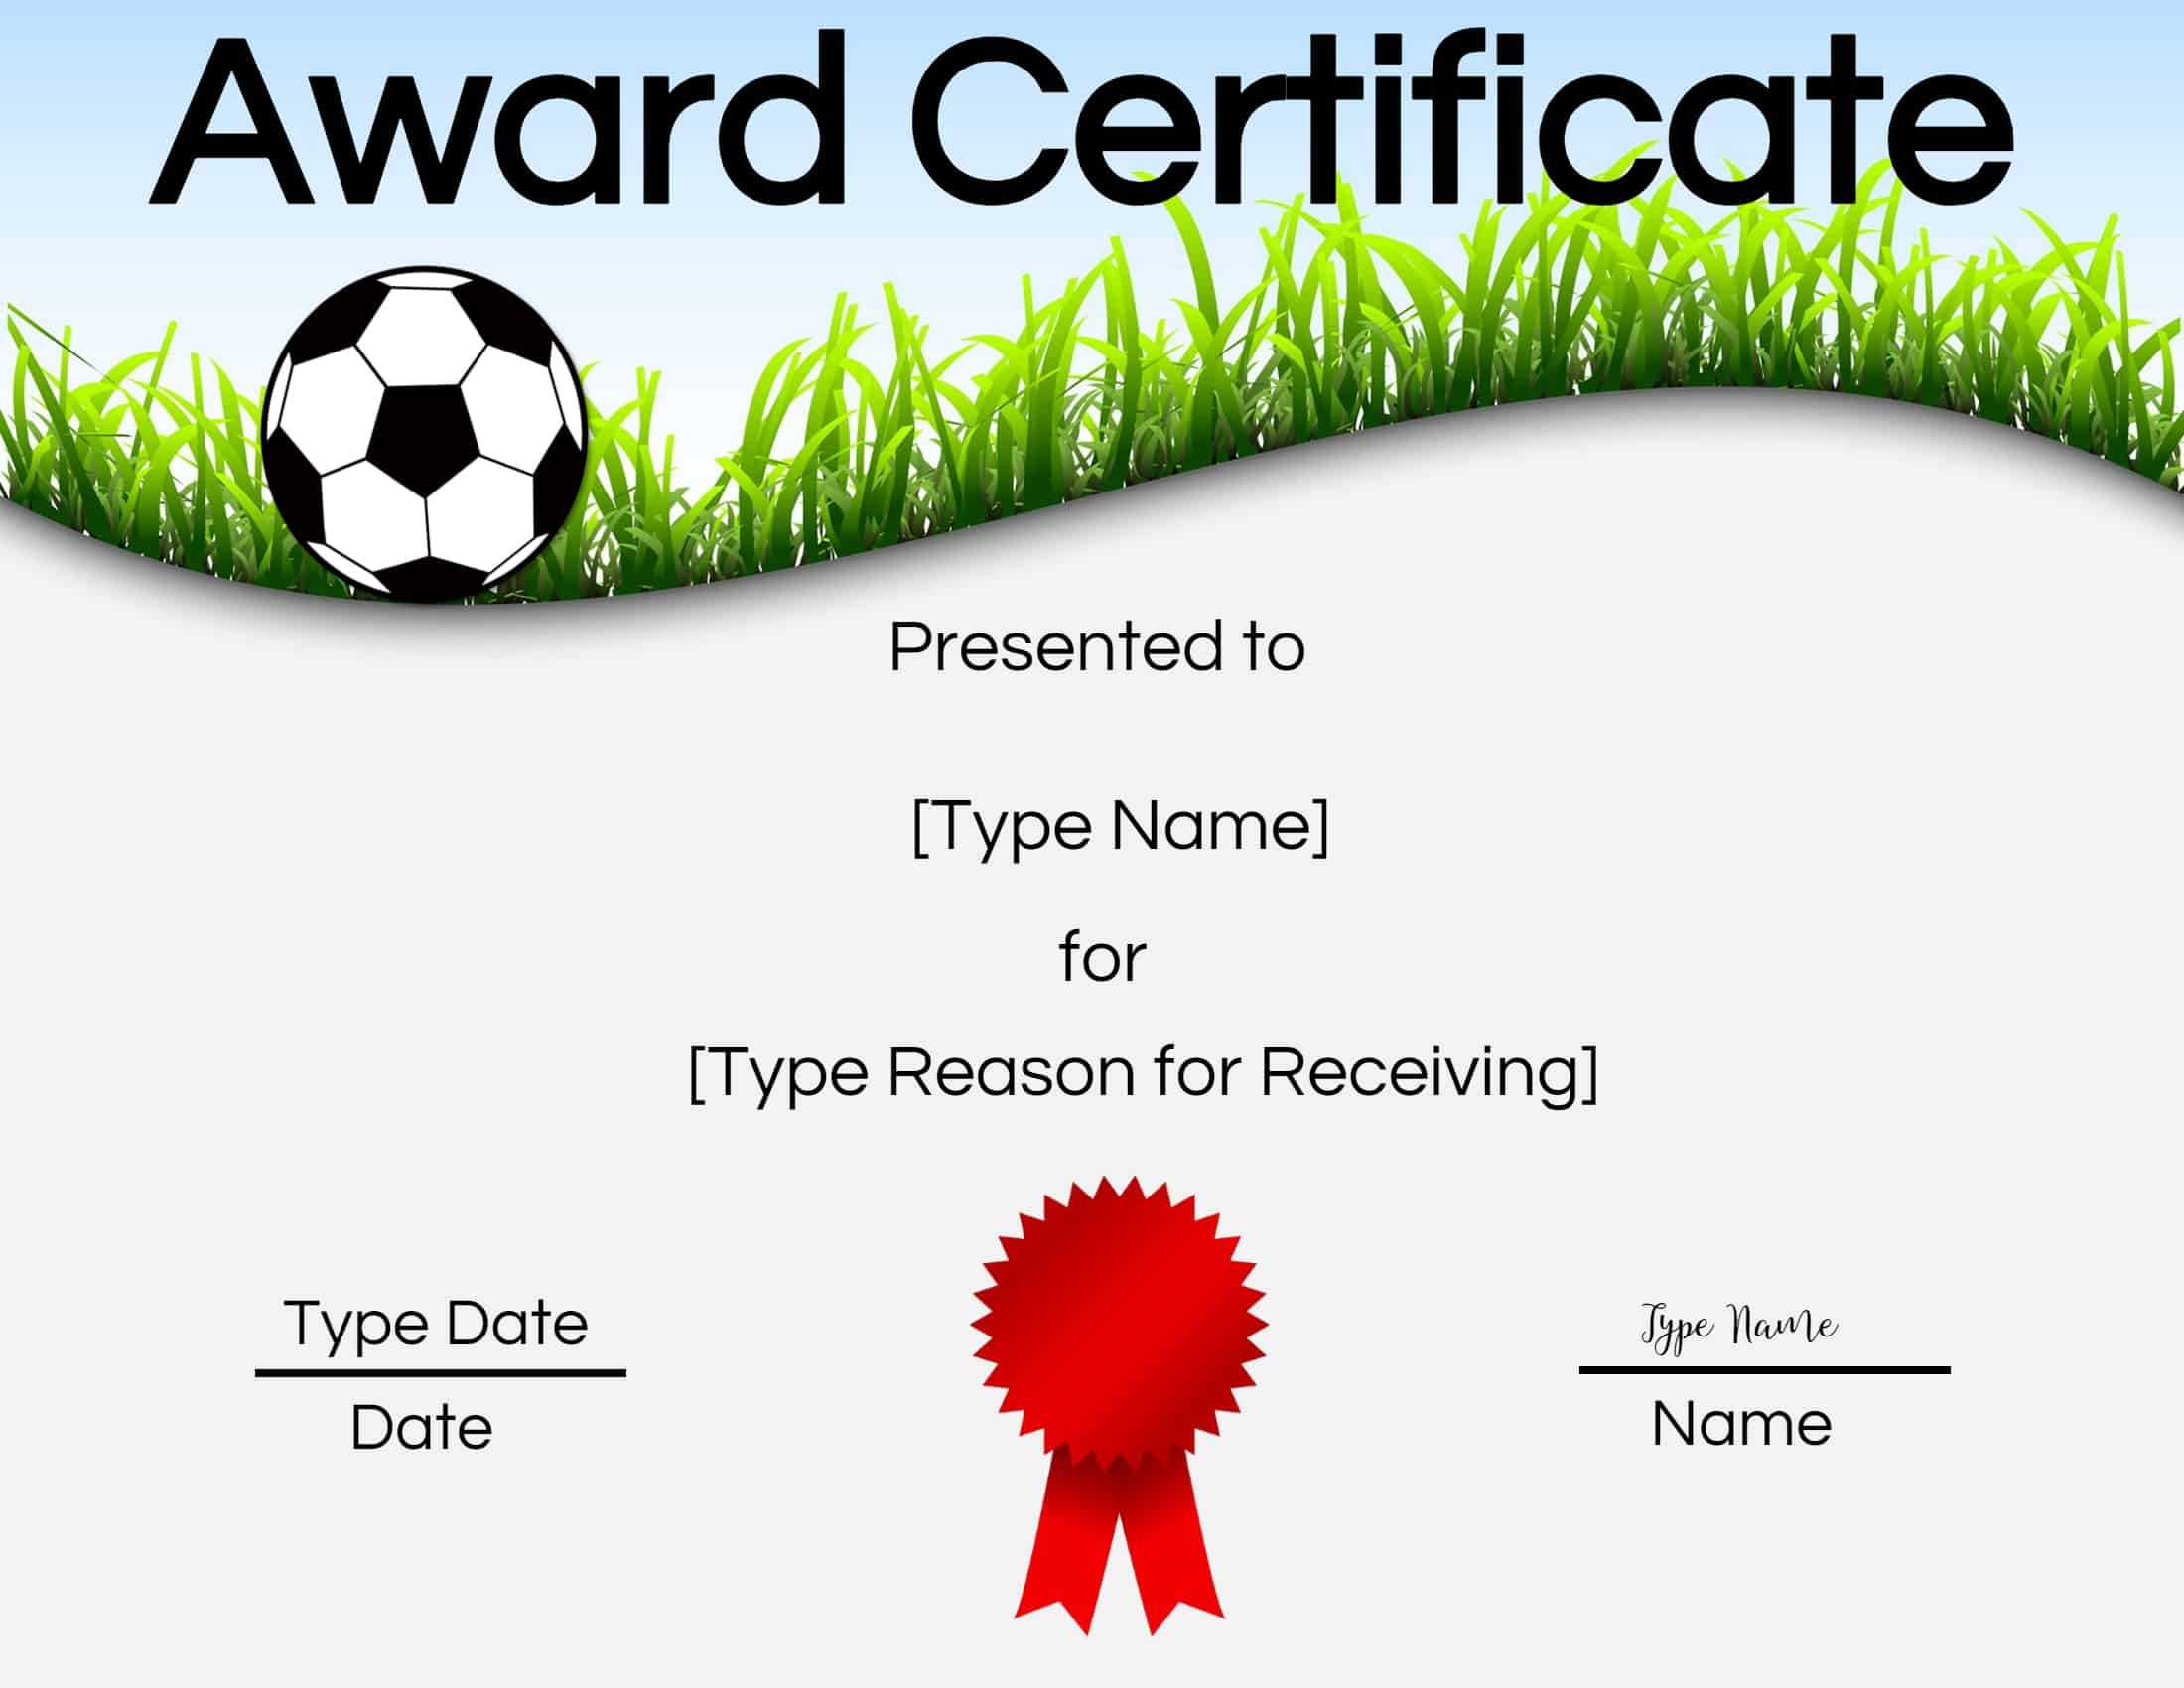 Free Soccer Certificate Maker | Edit Online And Print At Home Within Soccer Award Certificate Template